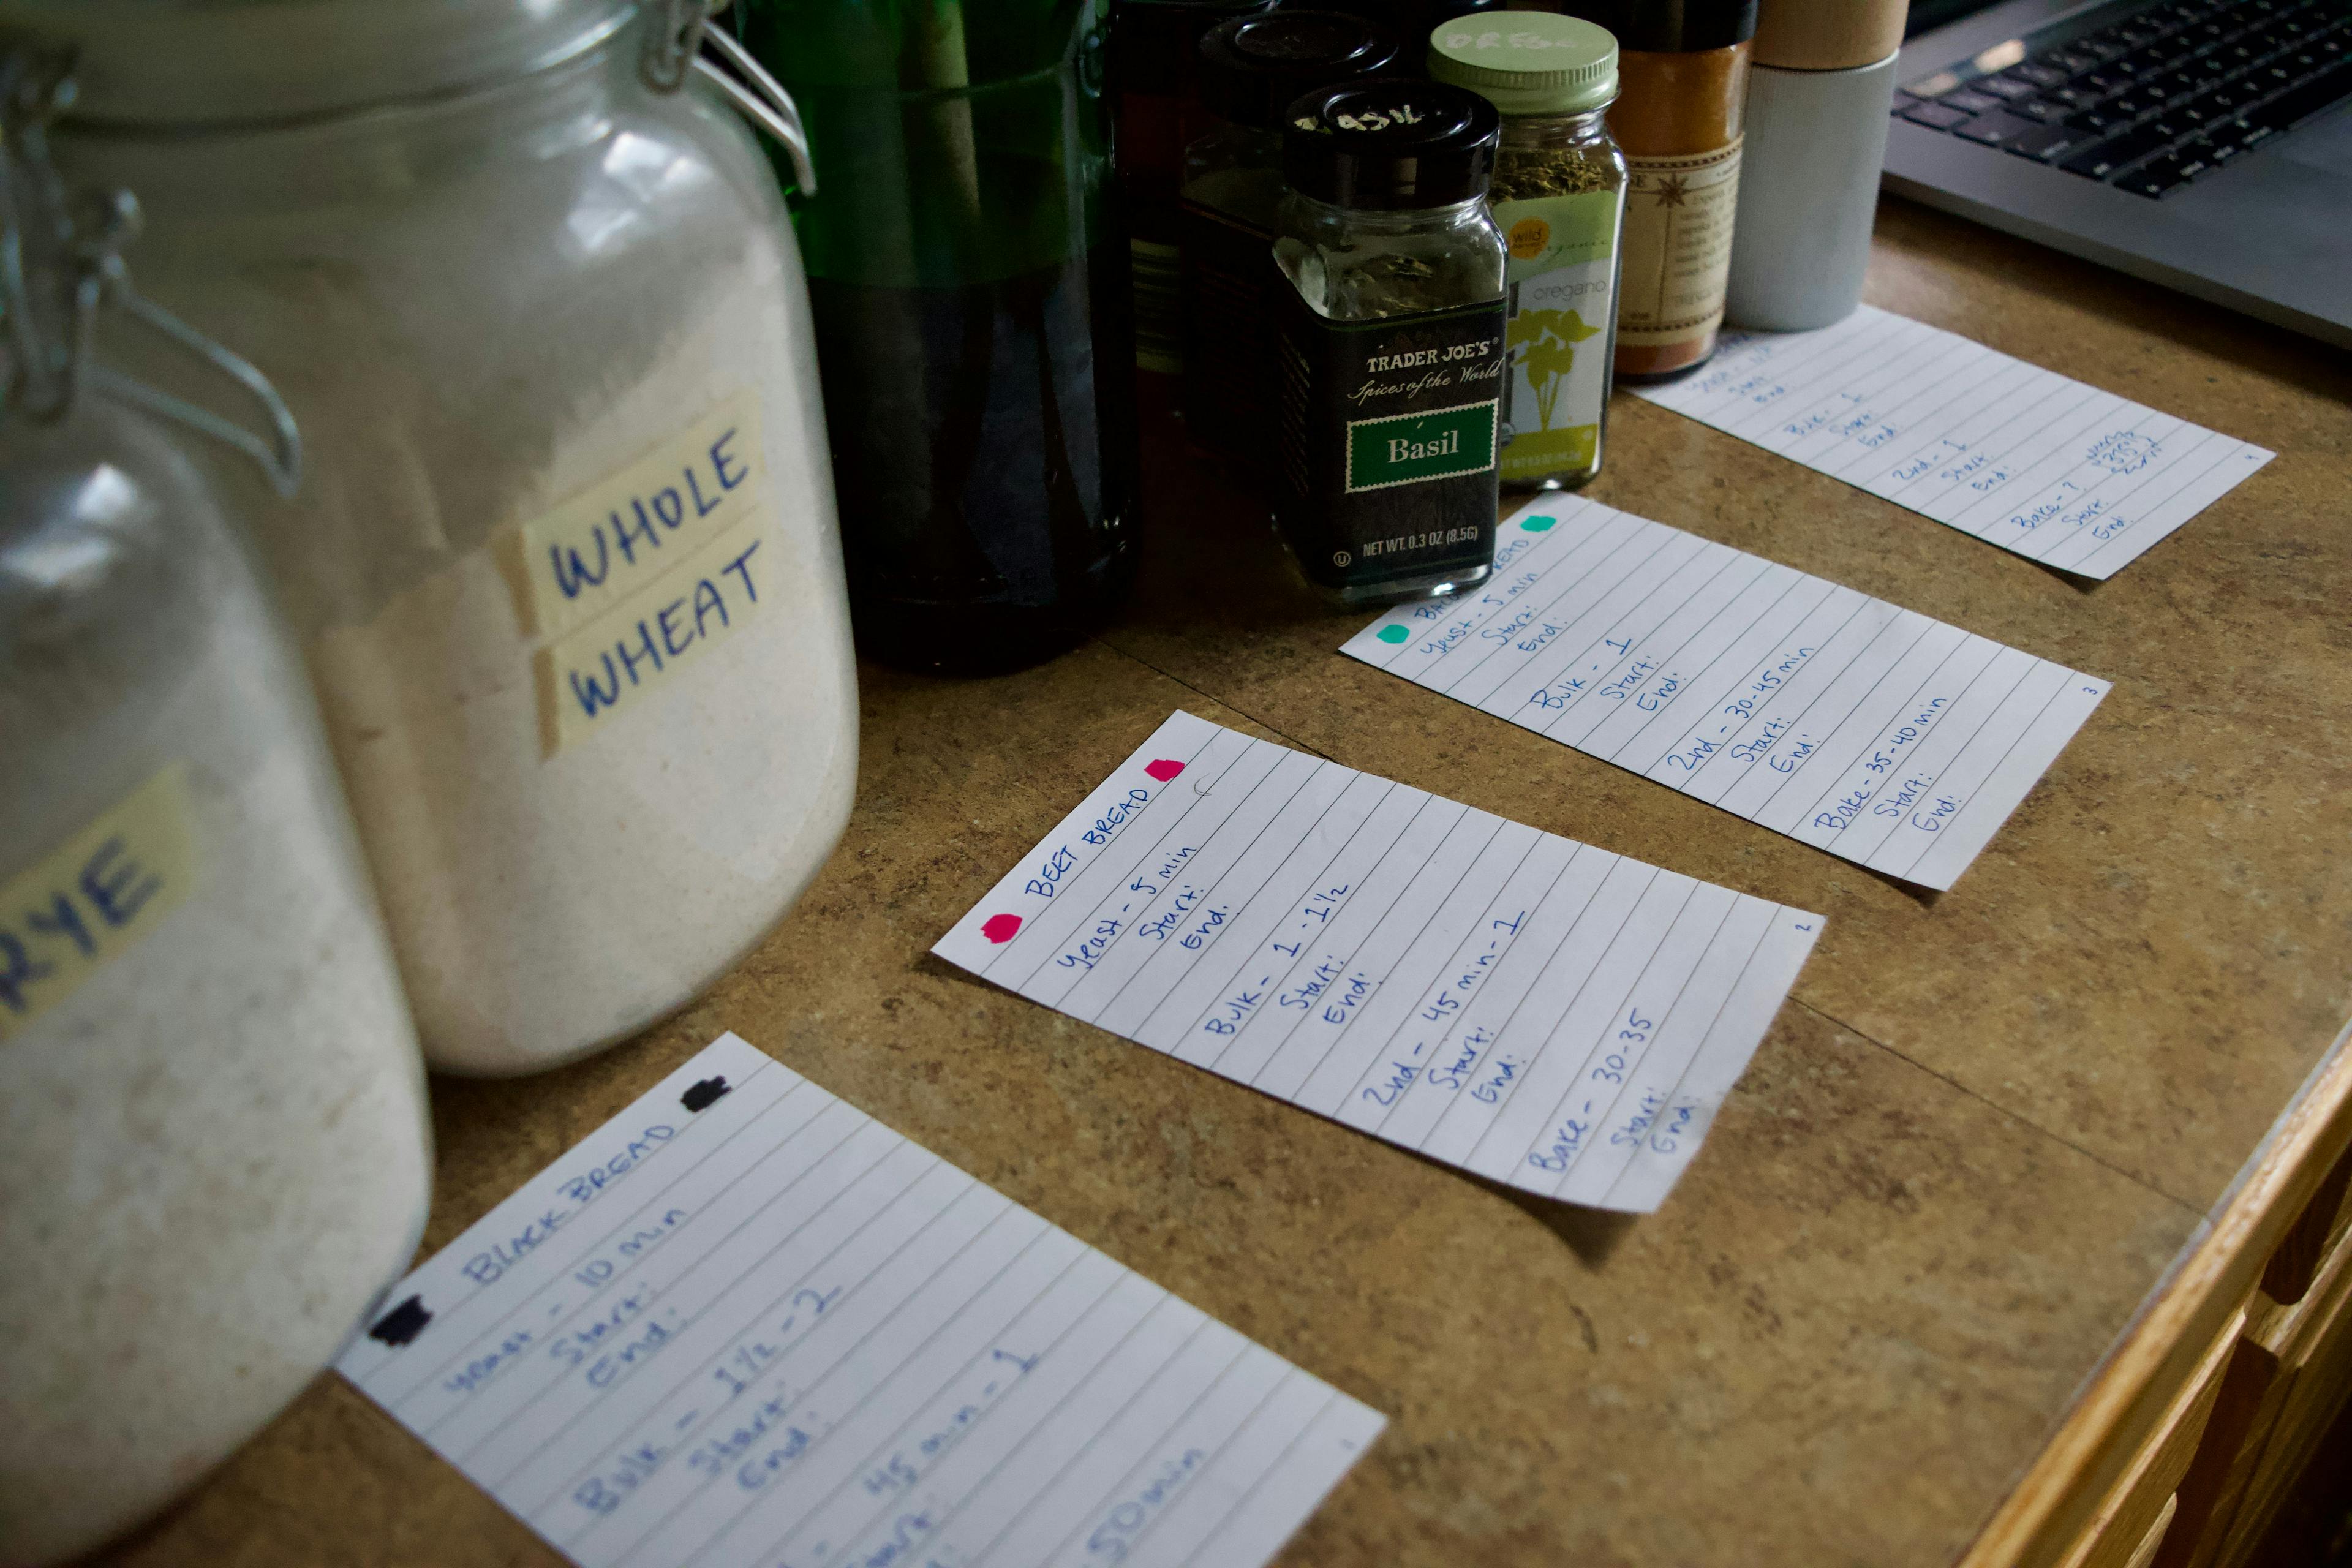 Four color coded notes with rise and bake times written on them, plus flour and bottles of dried herbs on the background